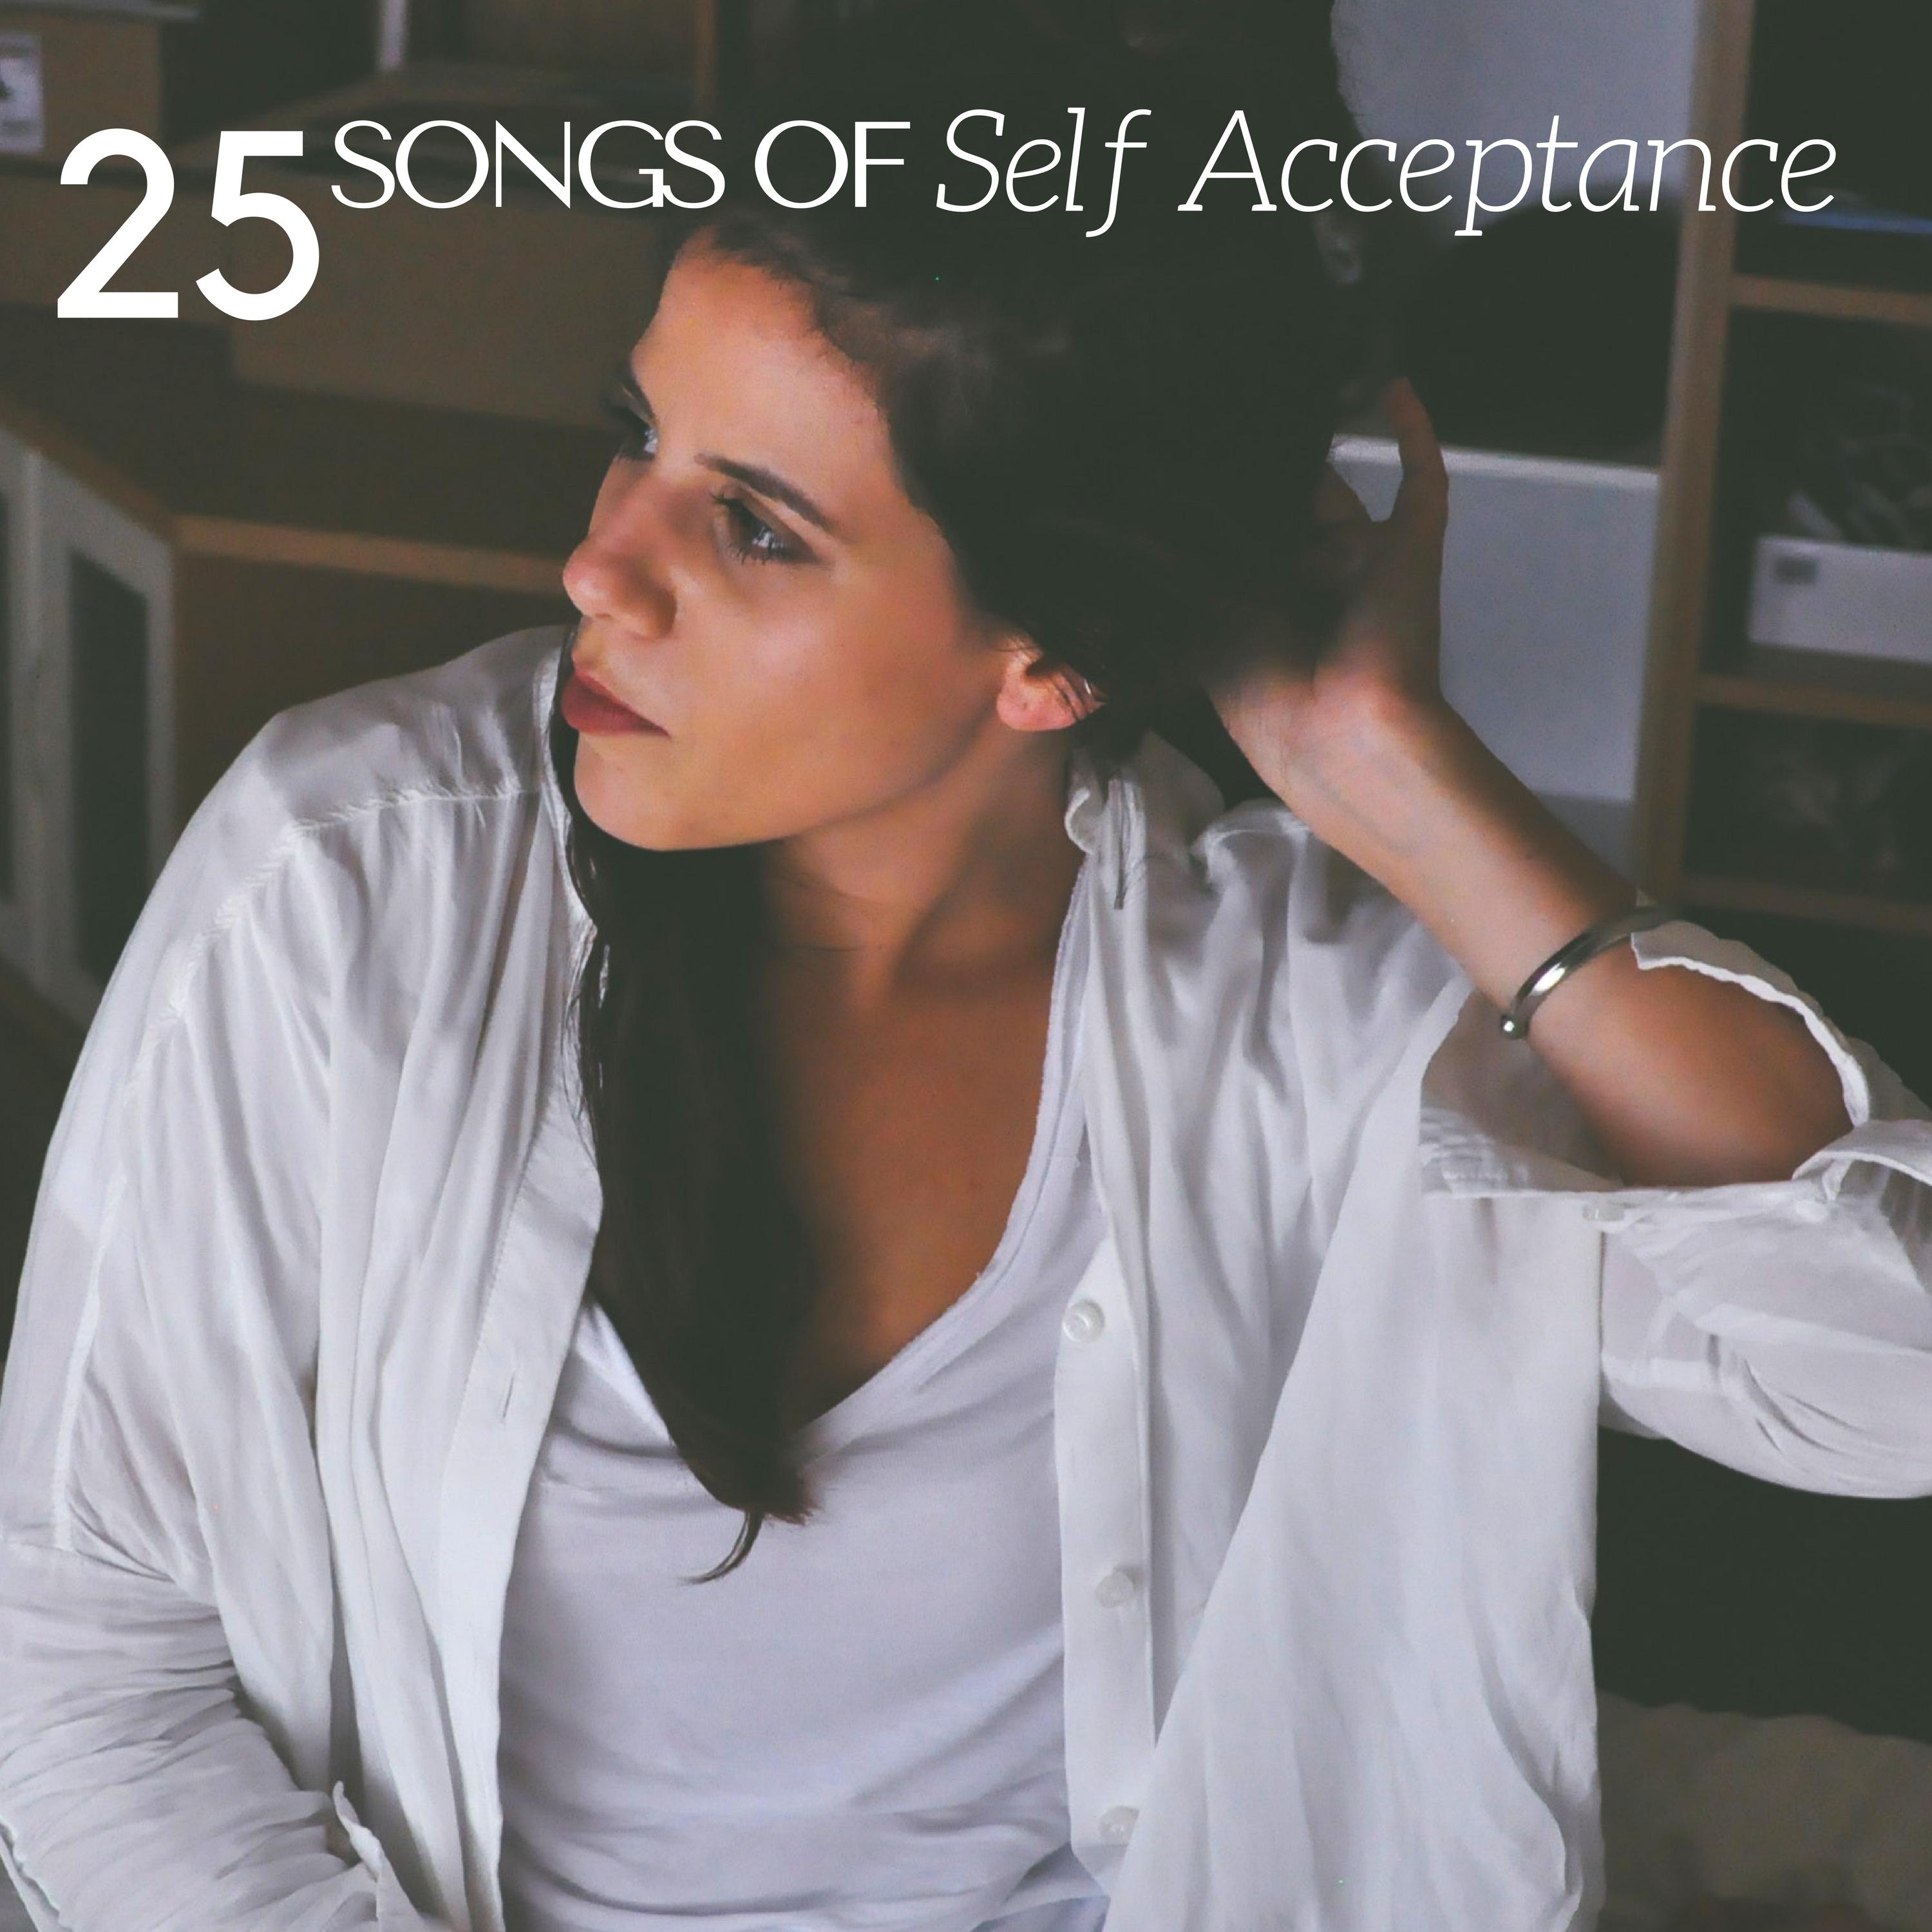 25 Songs of Self Acceptance - Meditation Music with the Most Relaxing Sounds of Nature, Piano and Guitar